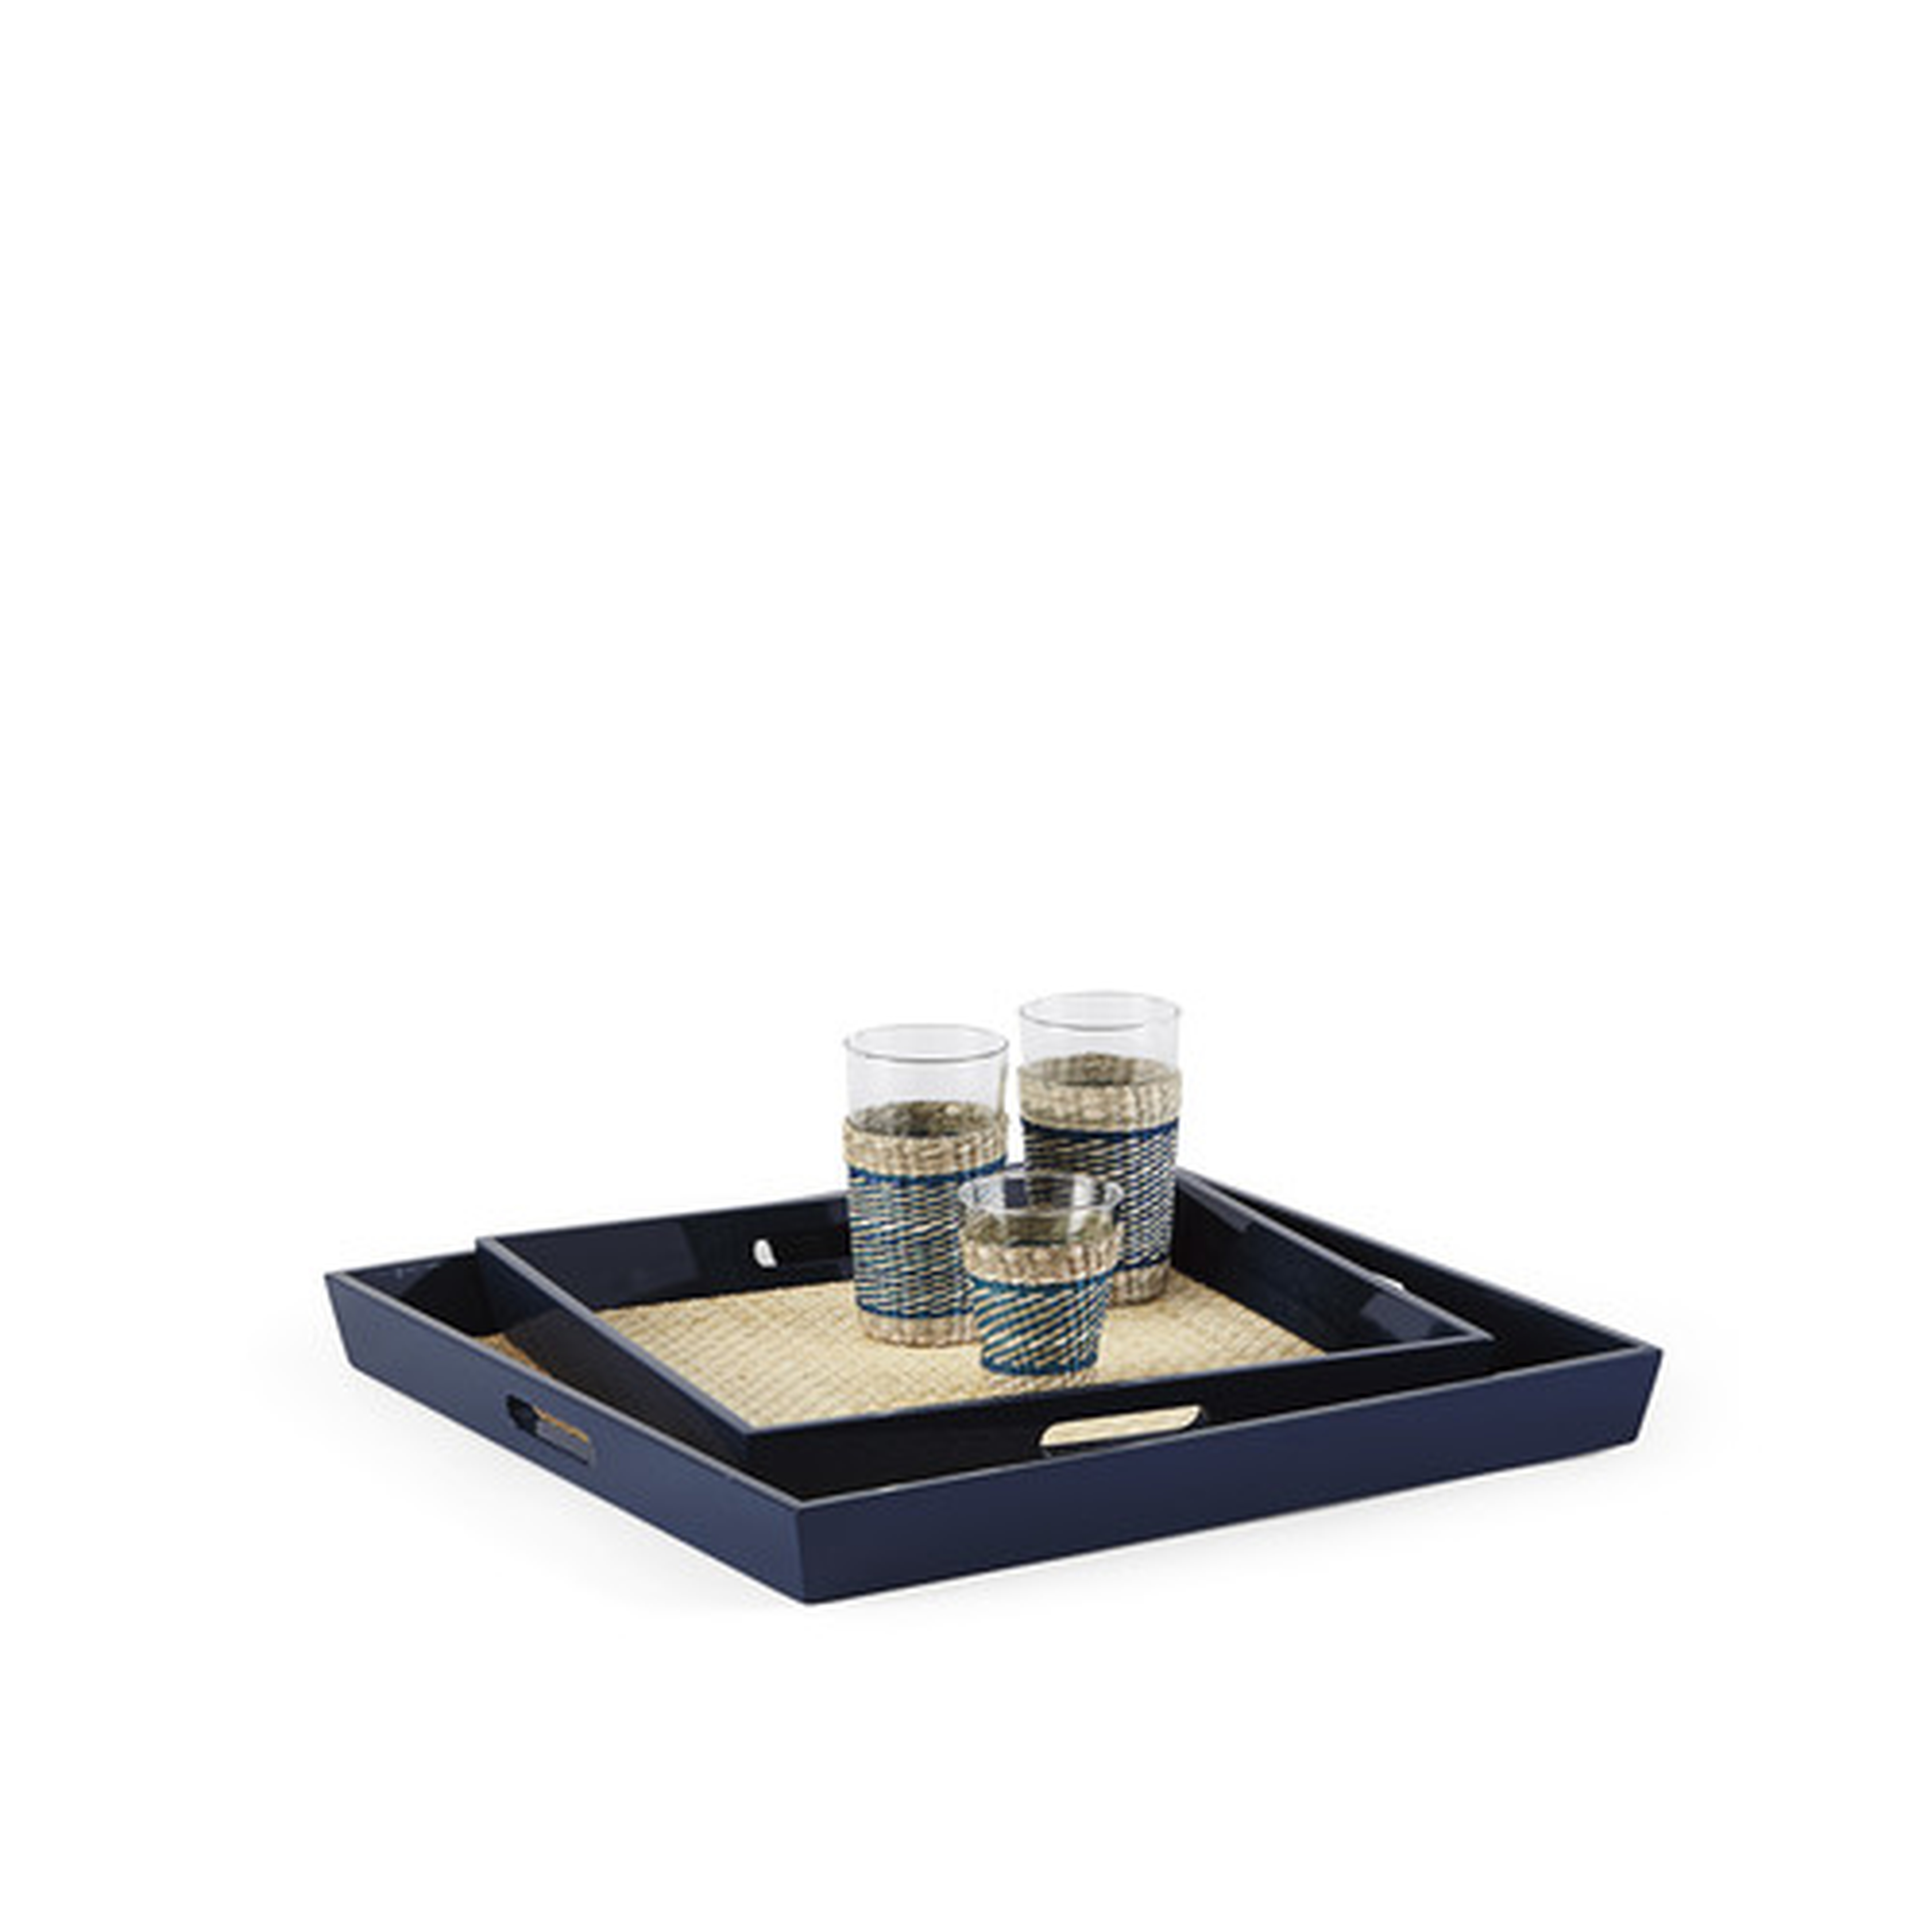 Lacquer Rattan Tray - Serena and Lily